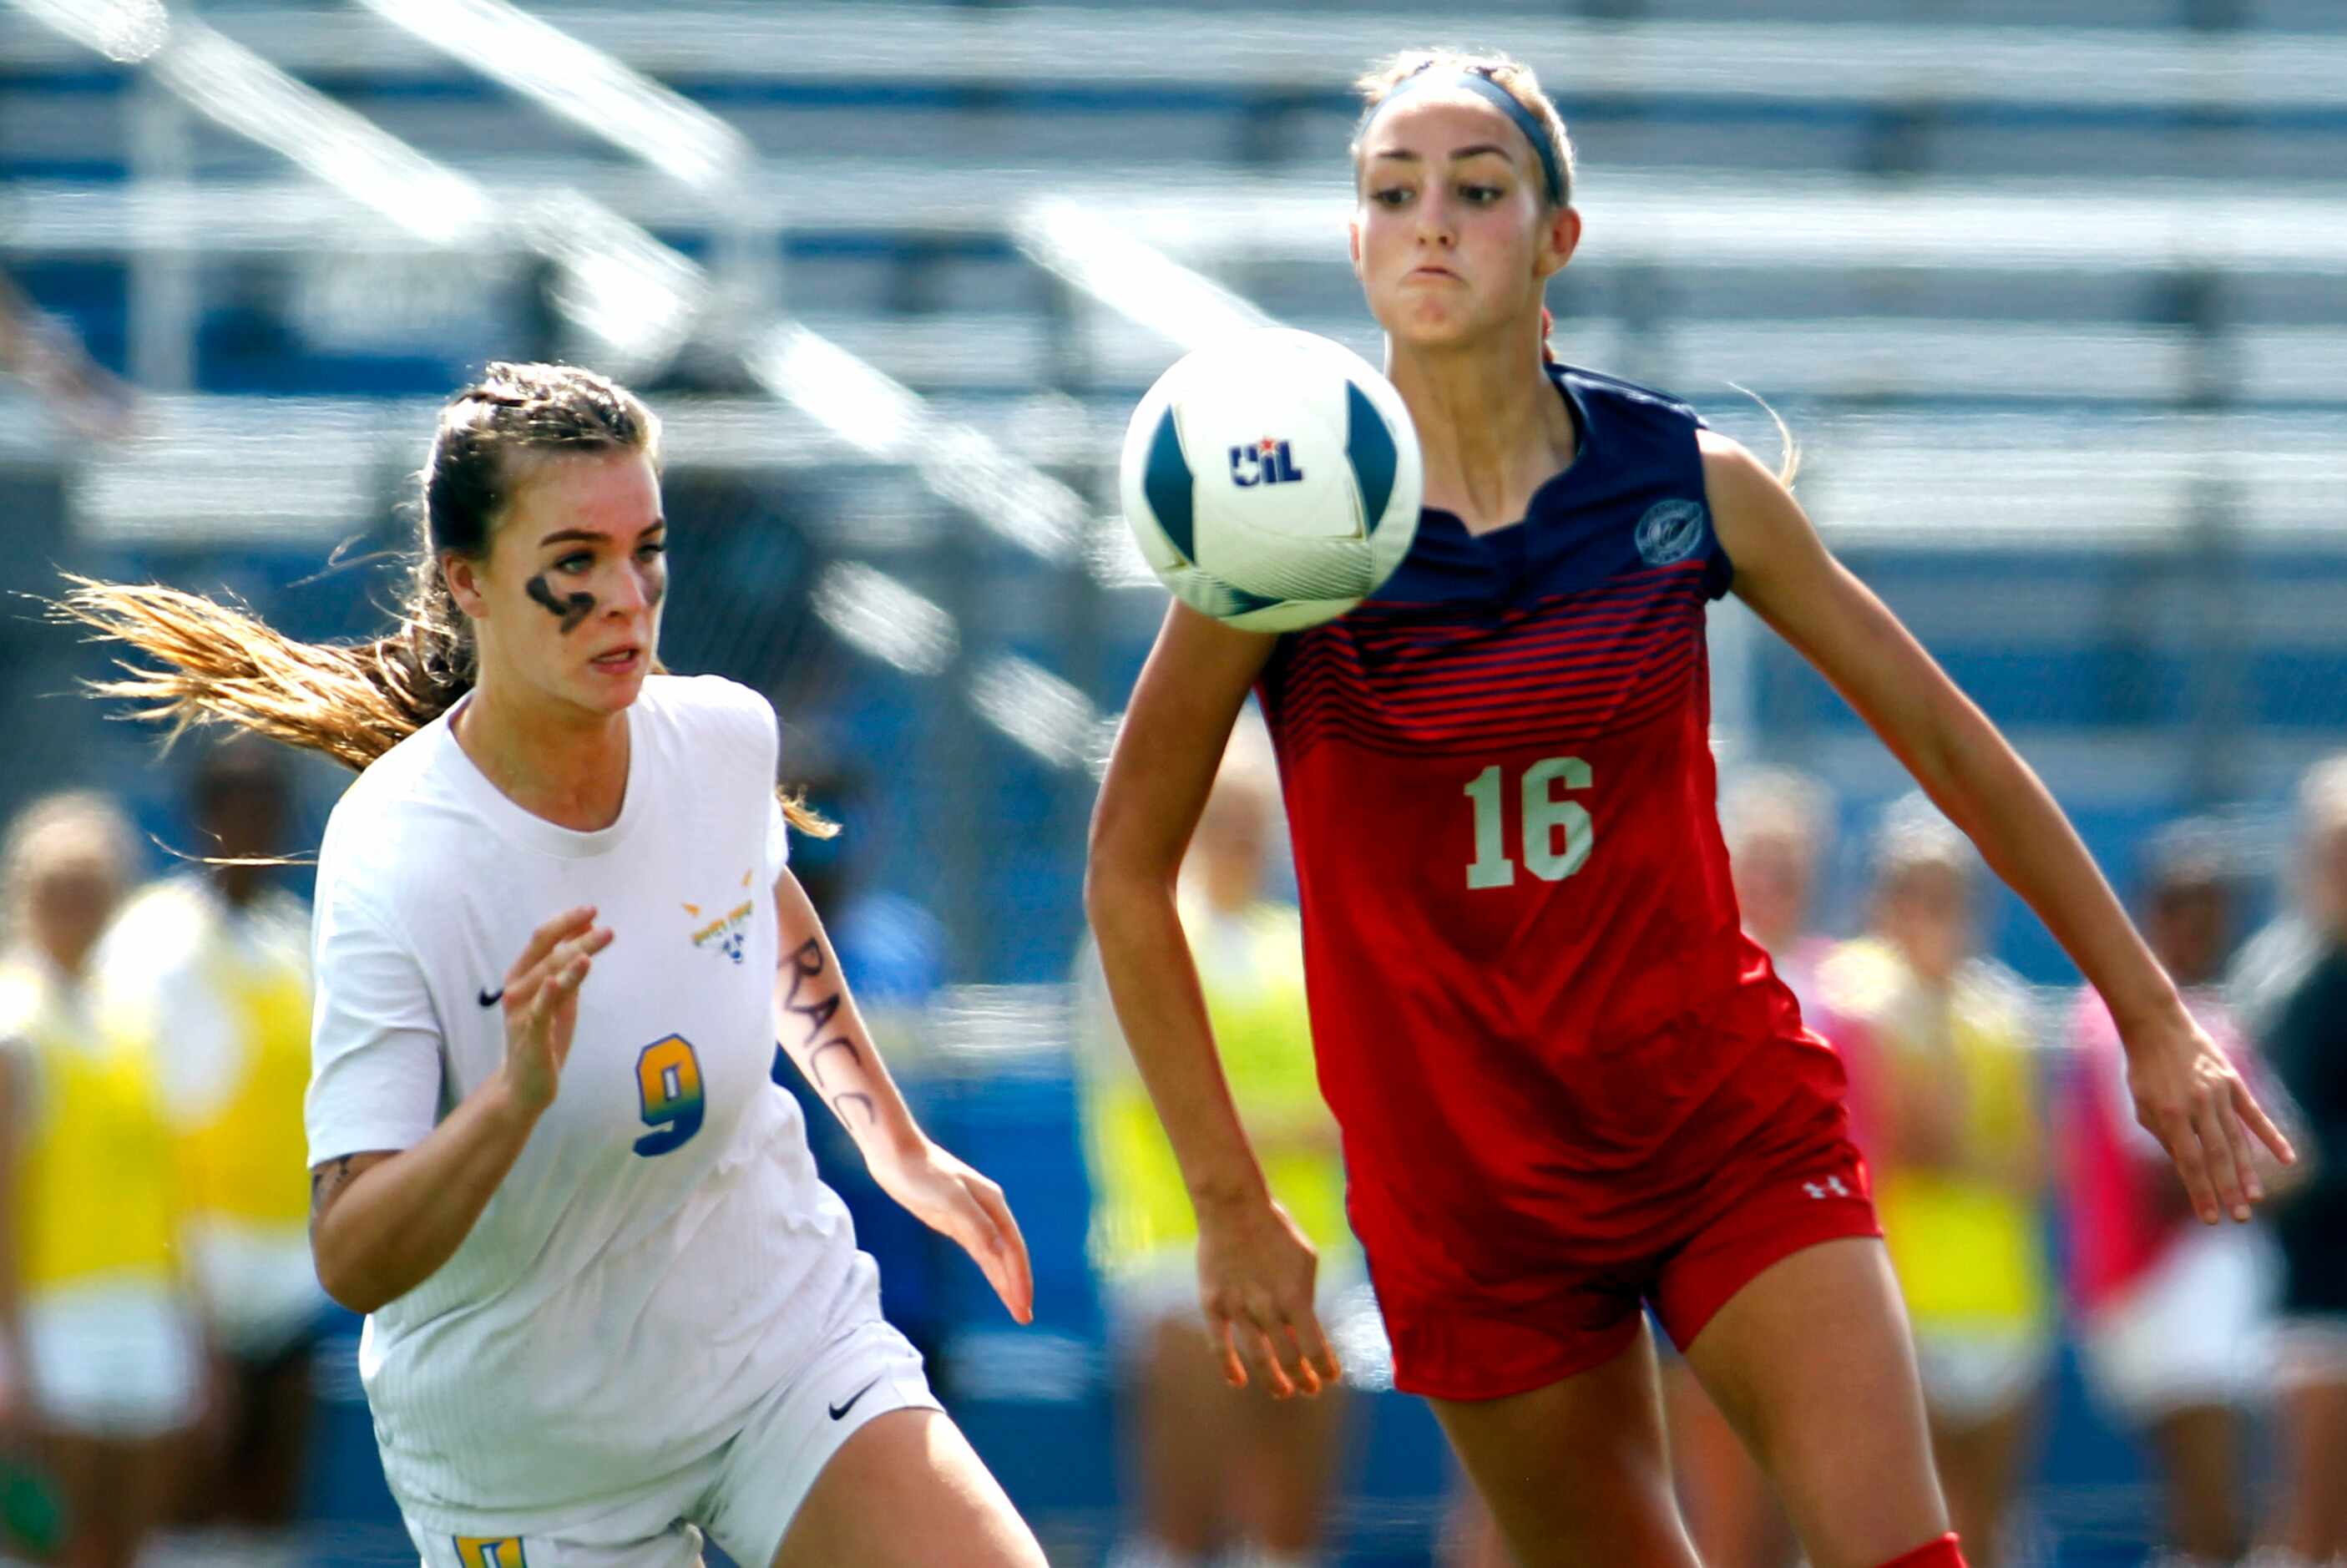 Grapevine midfielder Luciana Delloso (16) eyes the ball as she is challenged by Frisco...